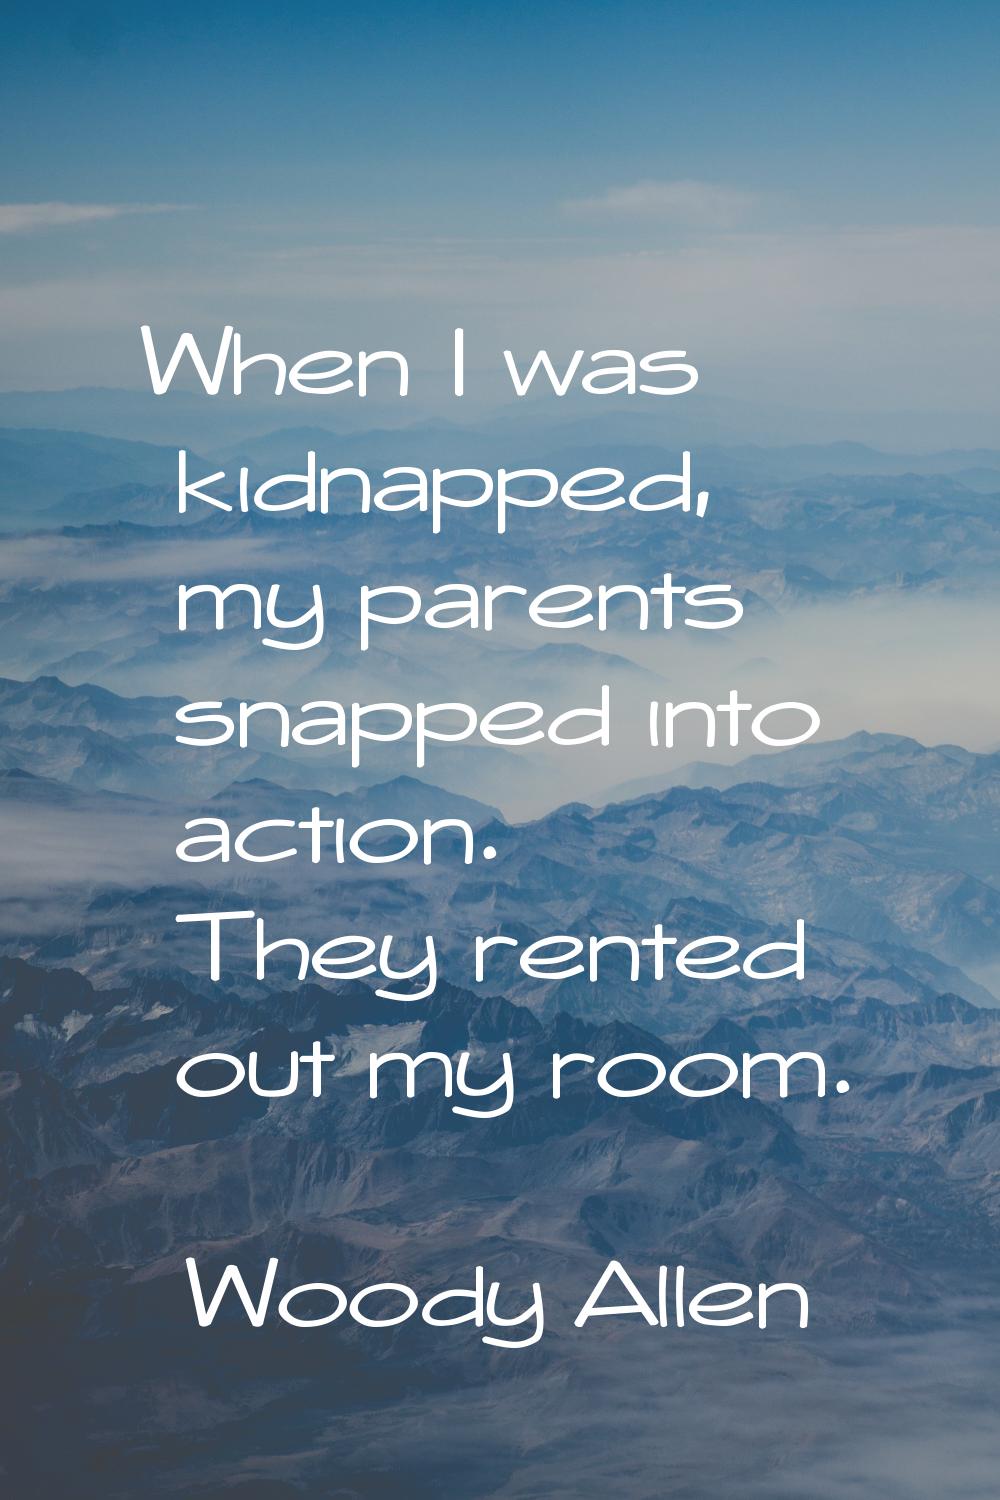 When I was kidnapped, my parents snapped into action. They rented out my room.